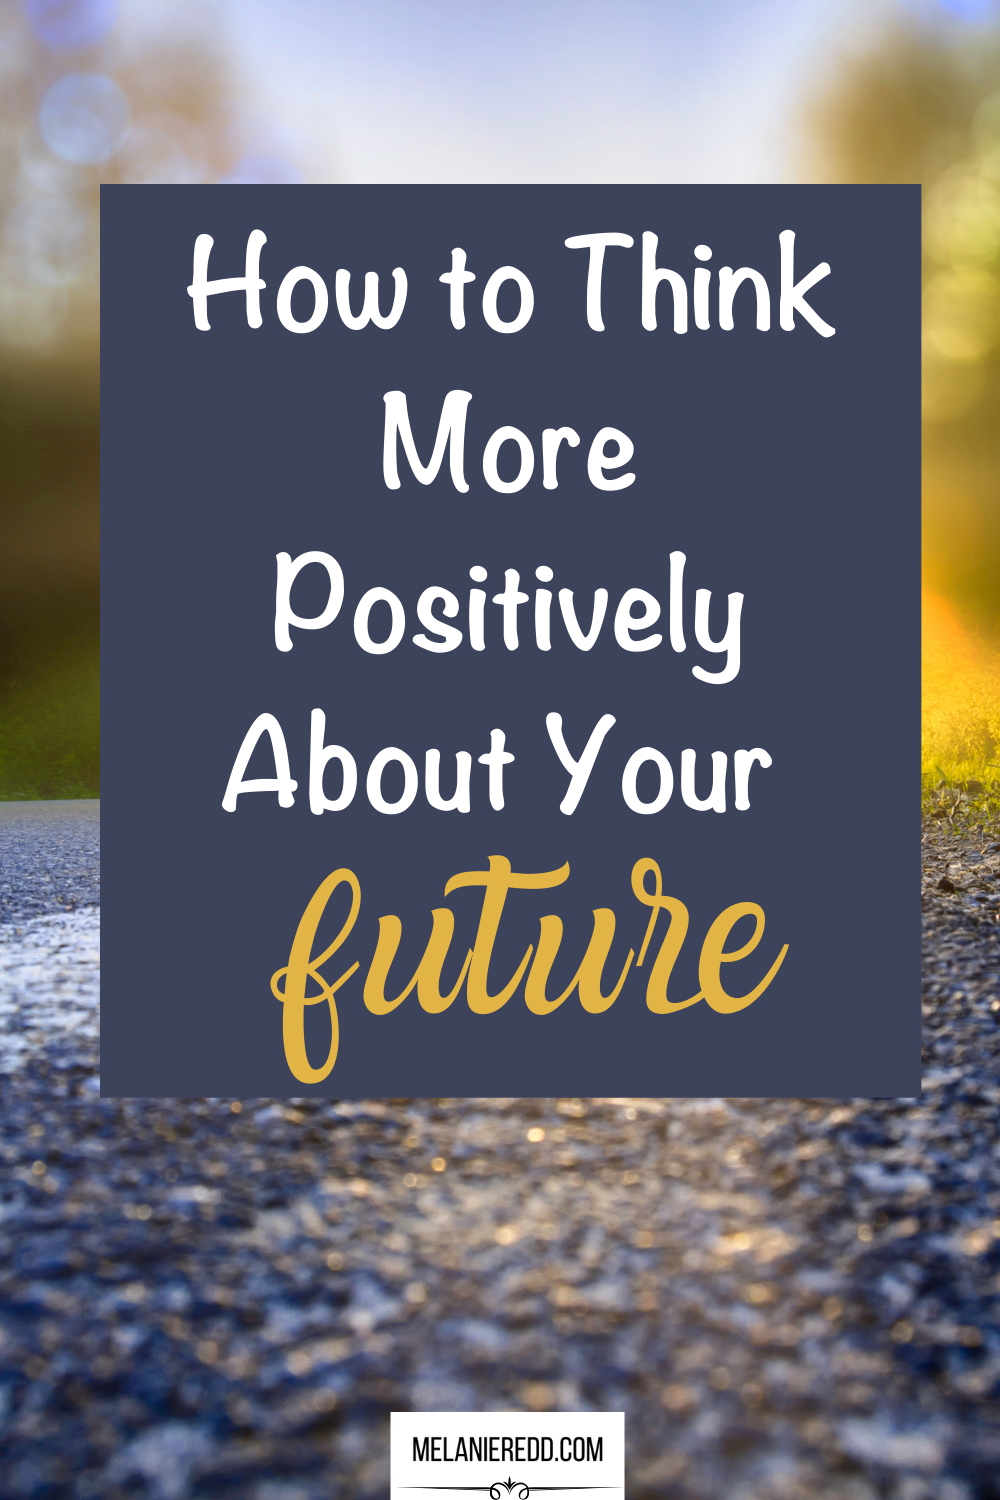 As we look ahead to the future, it's easy to have concerns. We can worry. However, here is how to think more positively about your future.